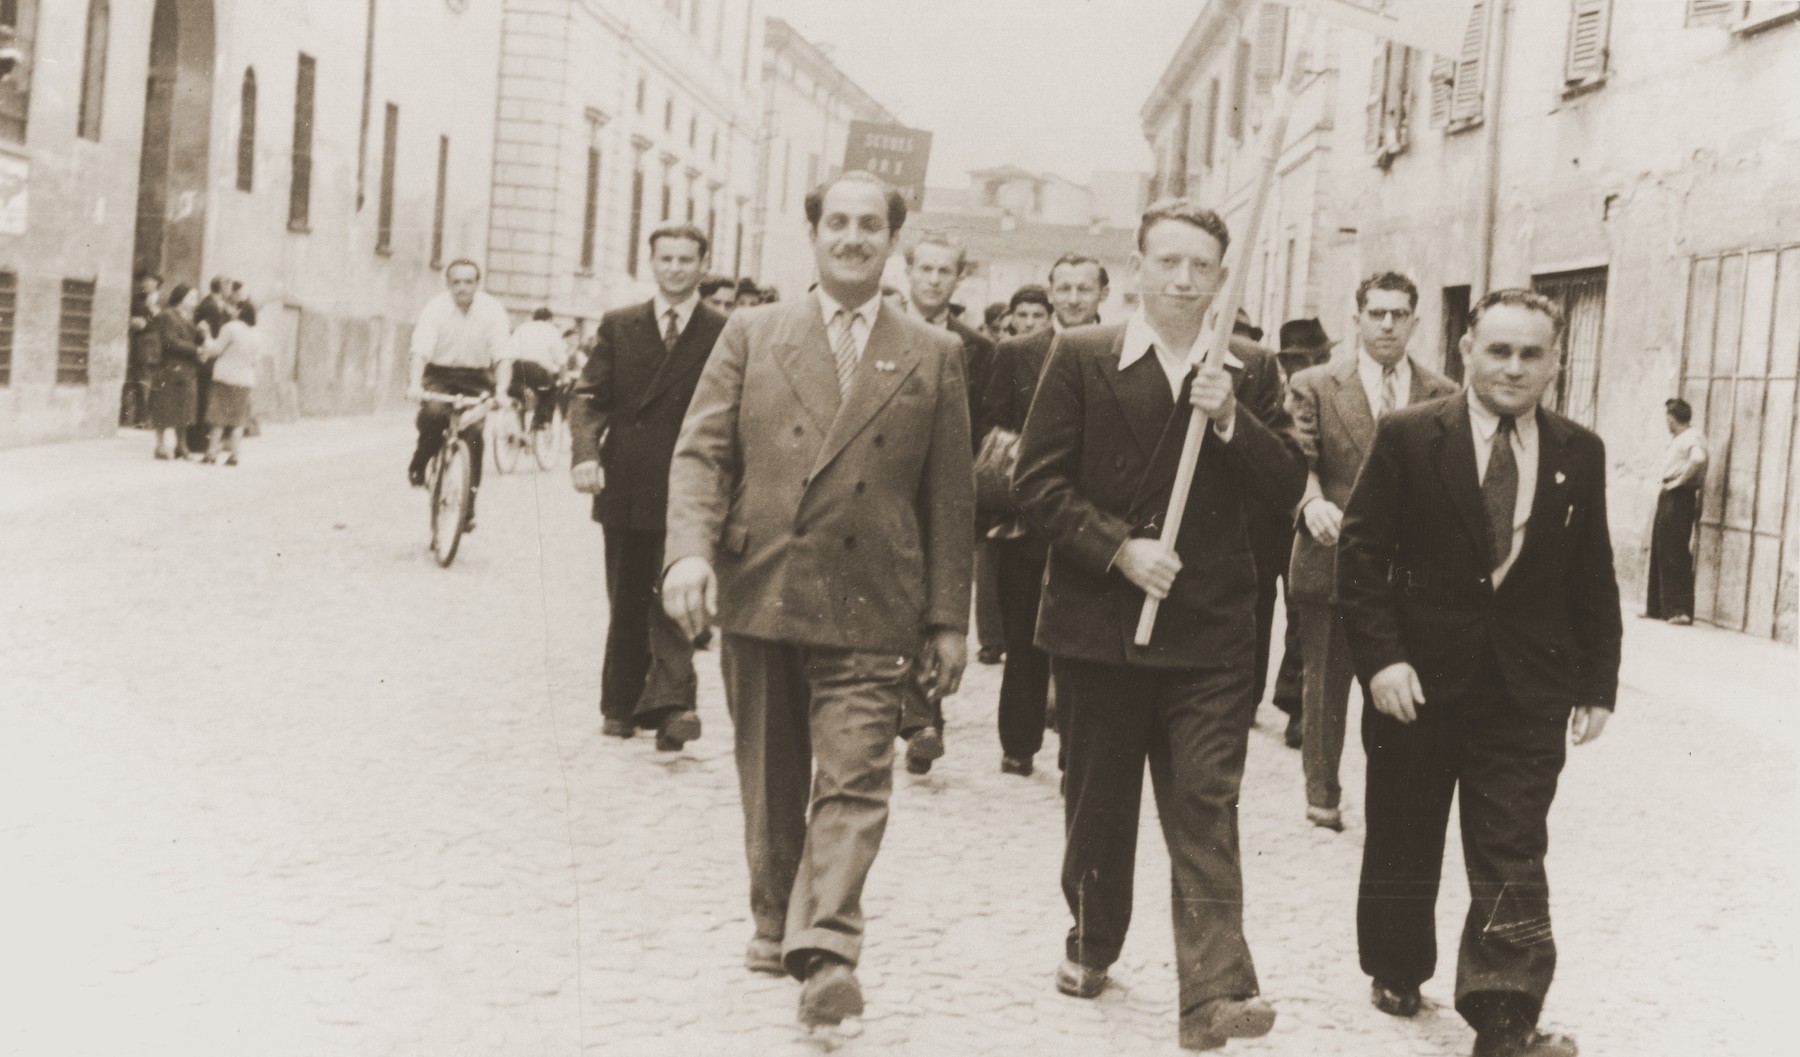 Jewish DPs in the Cremona displaced persons camp take part in a march advocating the creation of a Jewish state.  

Among those pictured is Motel Leikach (front row, right).